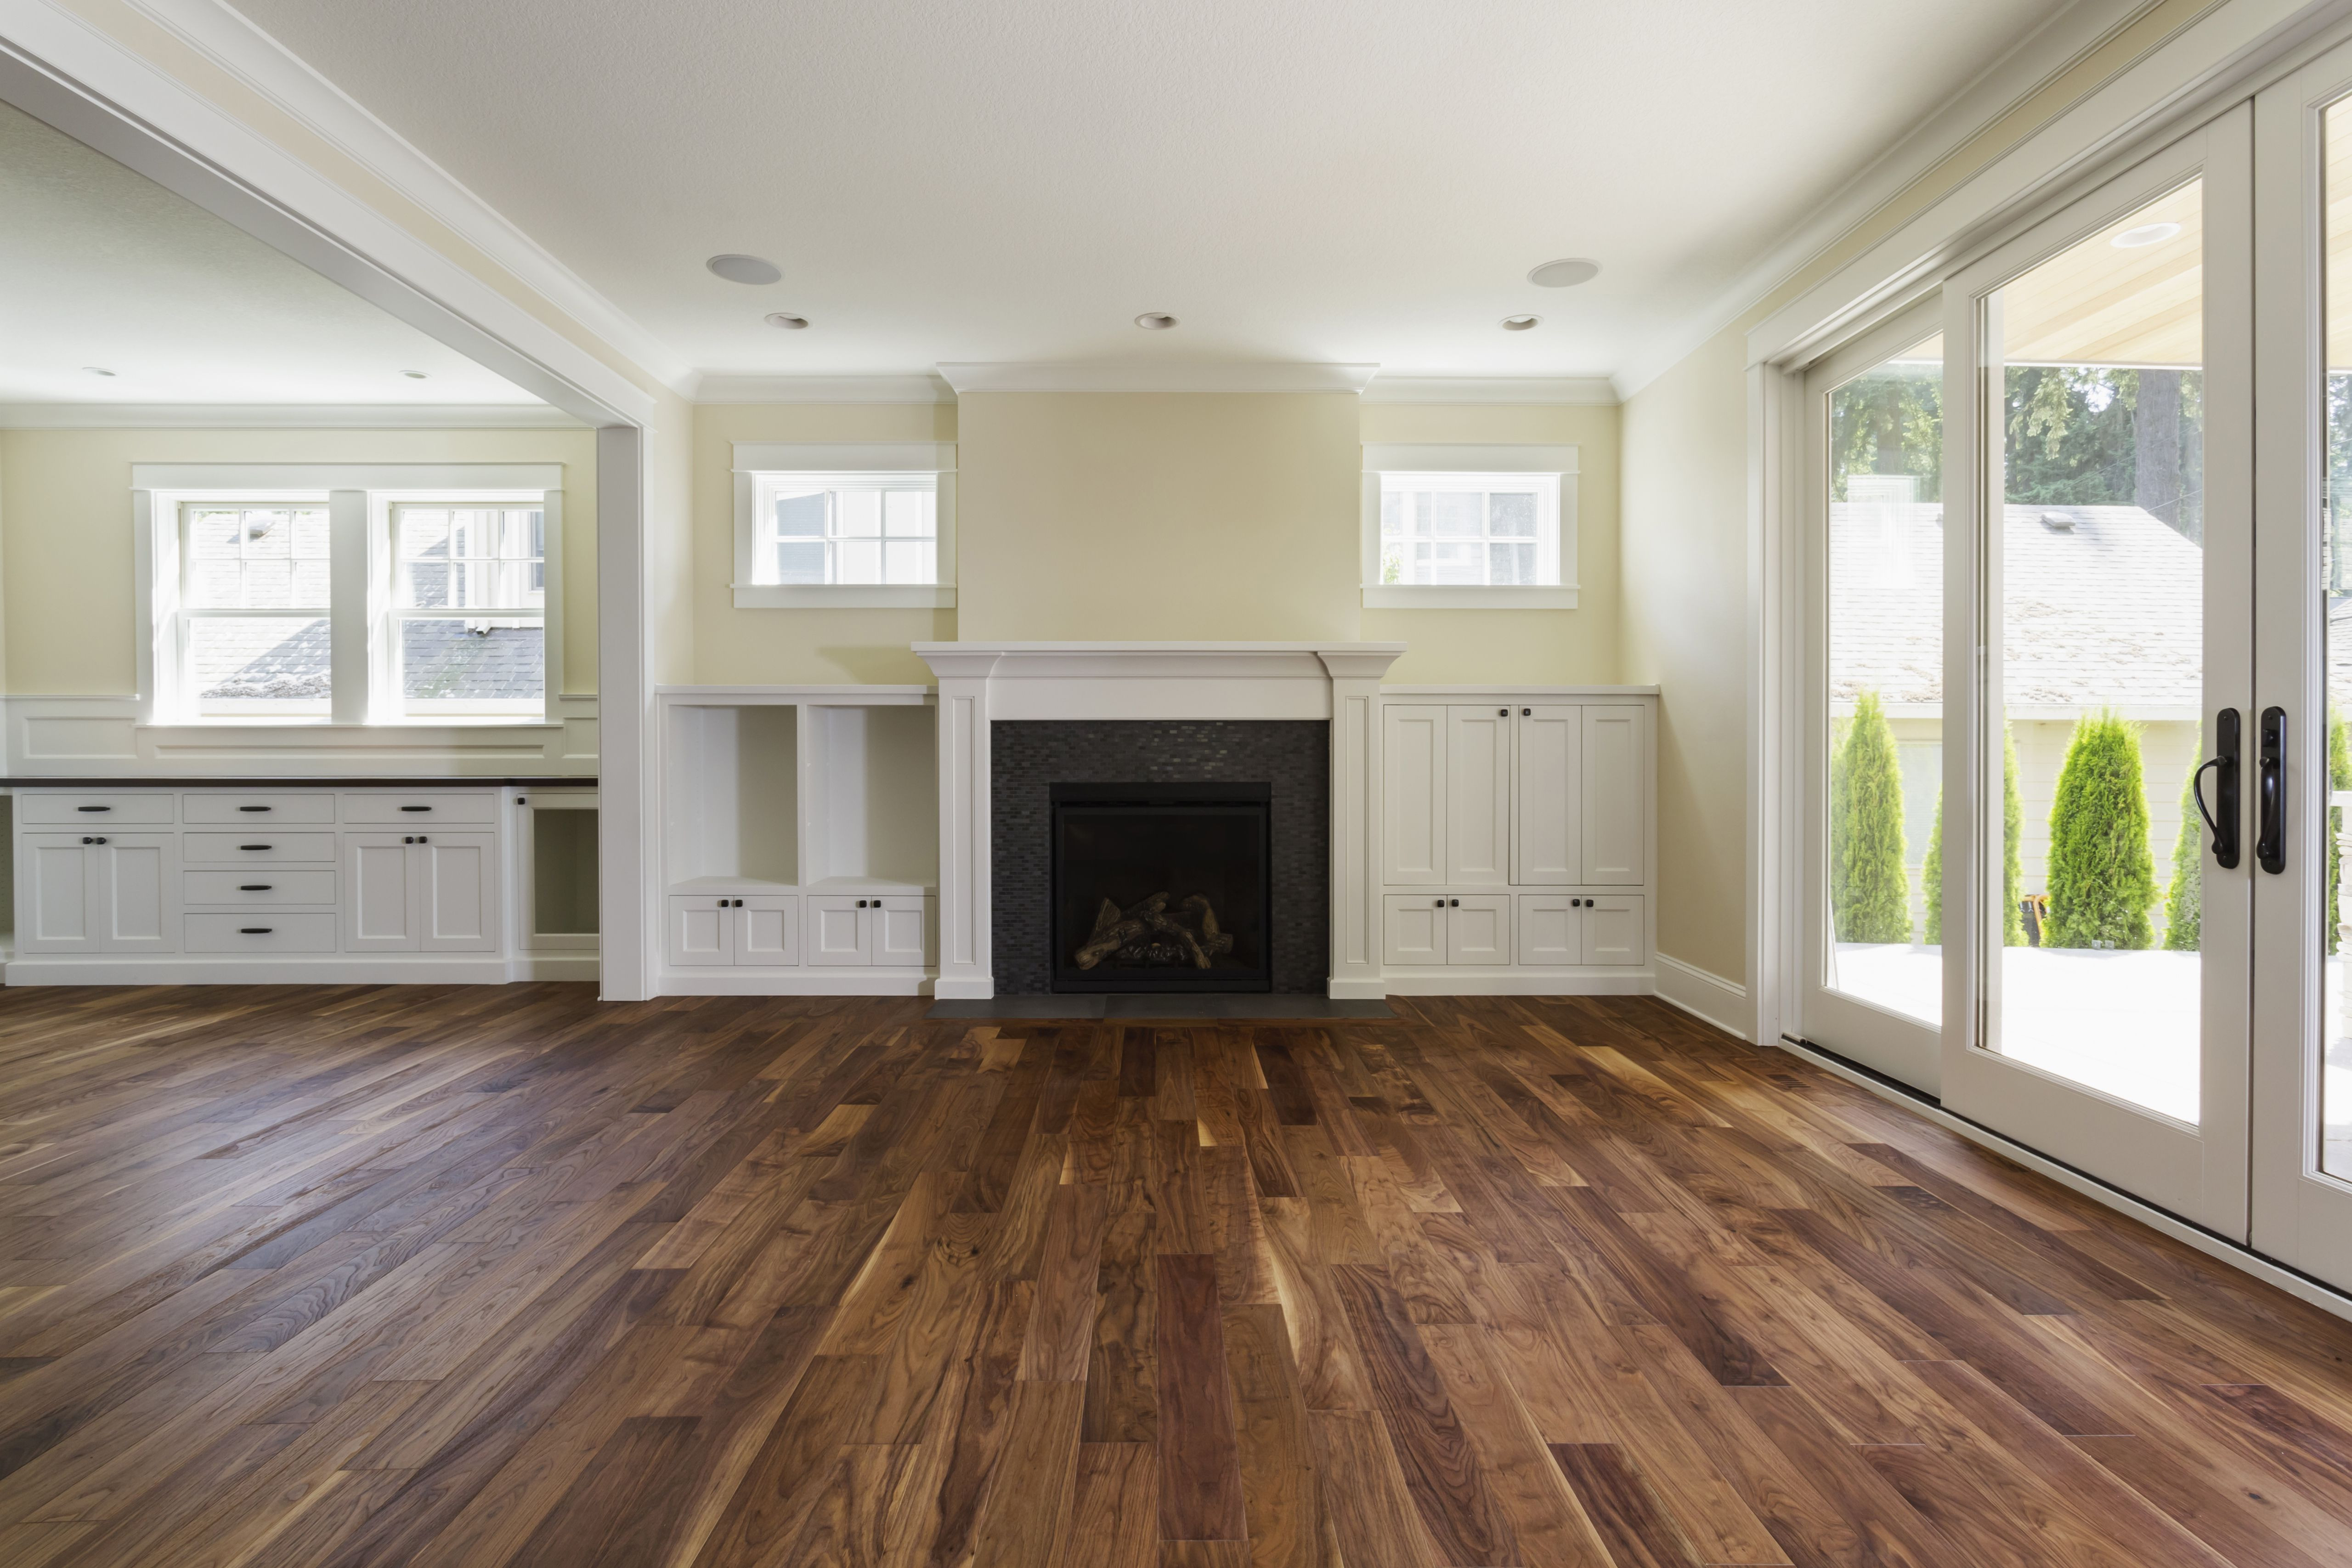 Bamboo Flooring Vs Hardwood Flooring Cost Of the Pros and Cons Of Prefinished Hardwood Flooring Regarding Fireplace and Built In Shelves In Living Room 482143011 57bef8e33df78cc16e035397